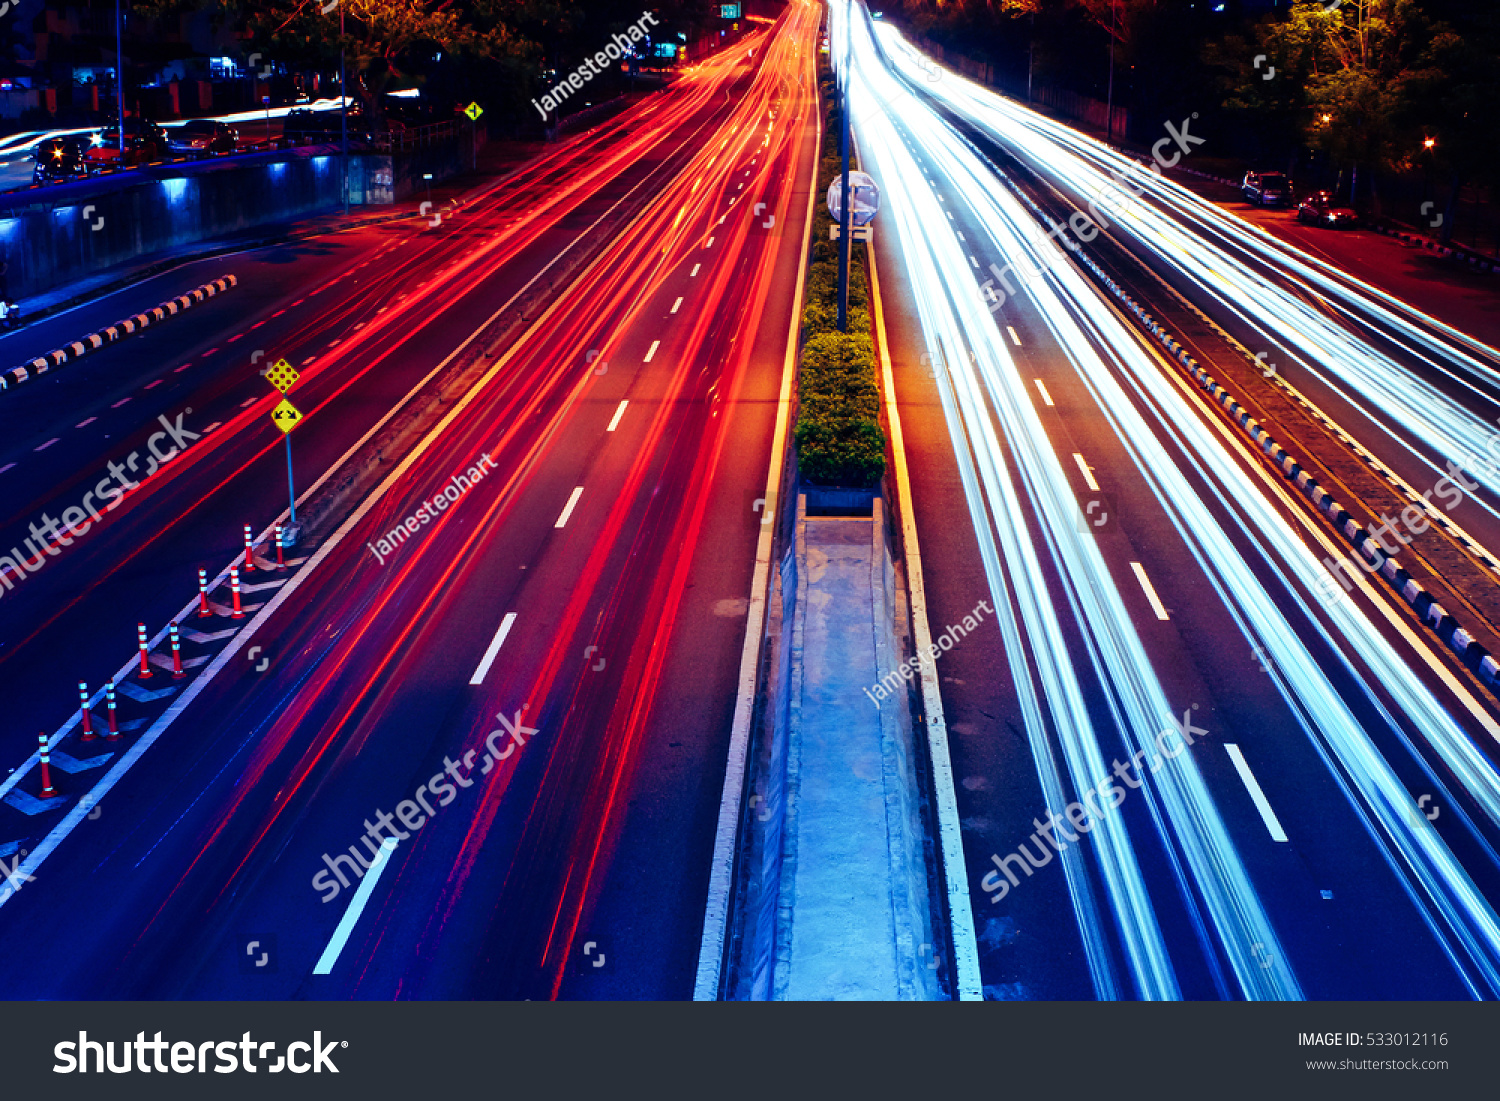 Long exposure photo of traffic with blurred traces from cars, top view. #533012116